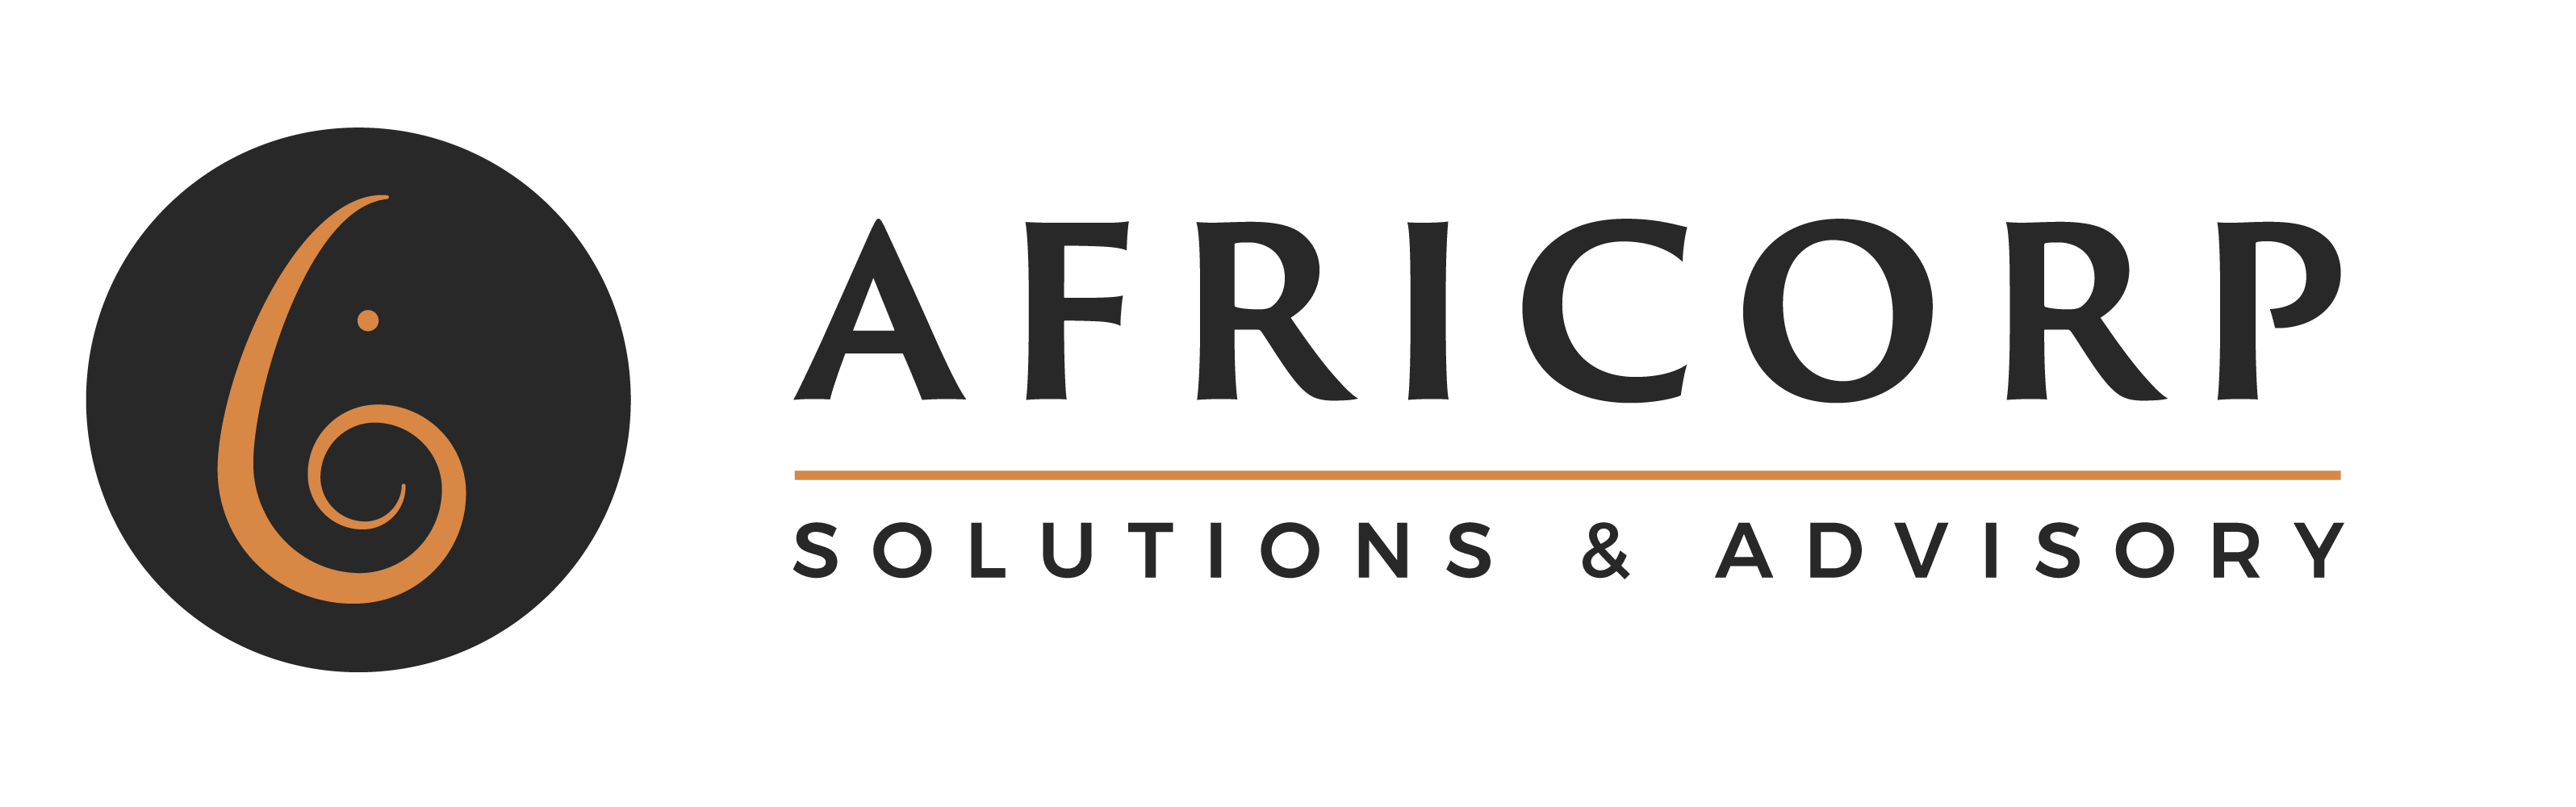 Africorp Solutions